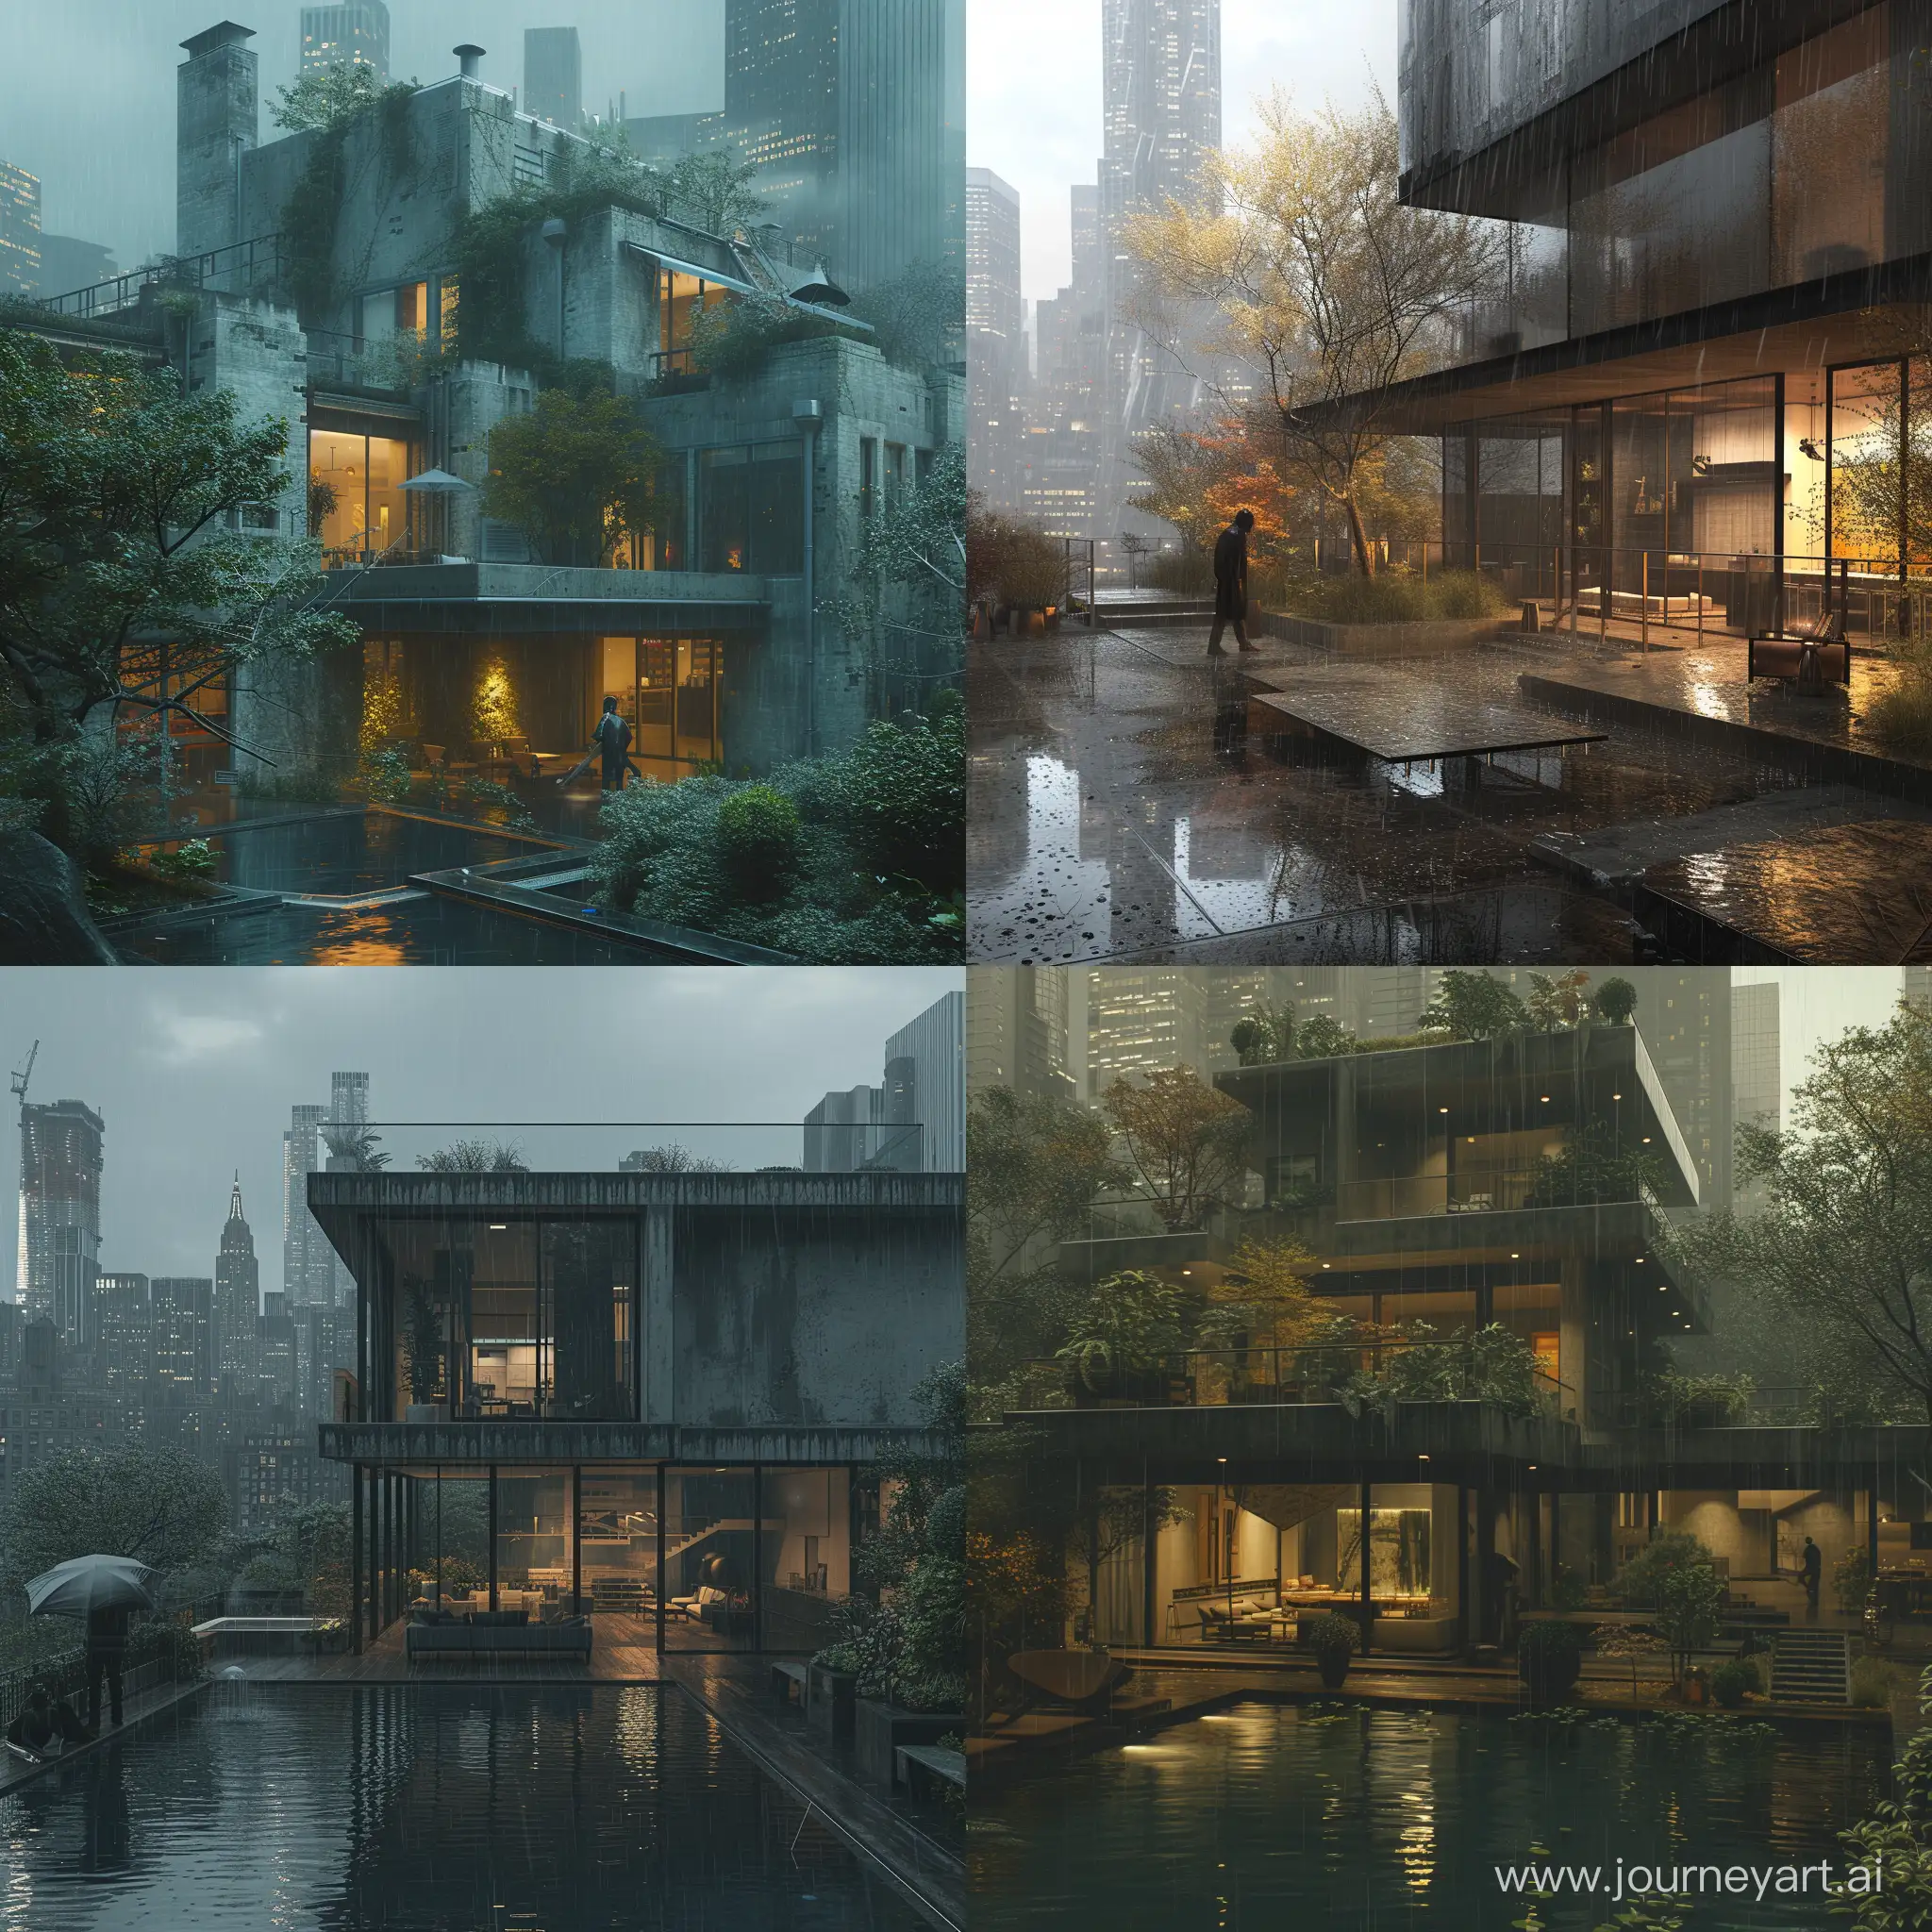 A villa in New York City. The weather is rainy and an architect is seen in the scene. The year is 2030.